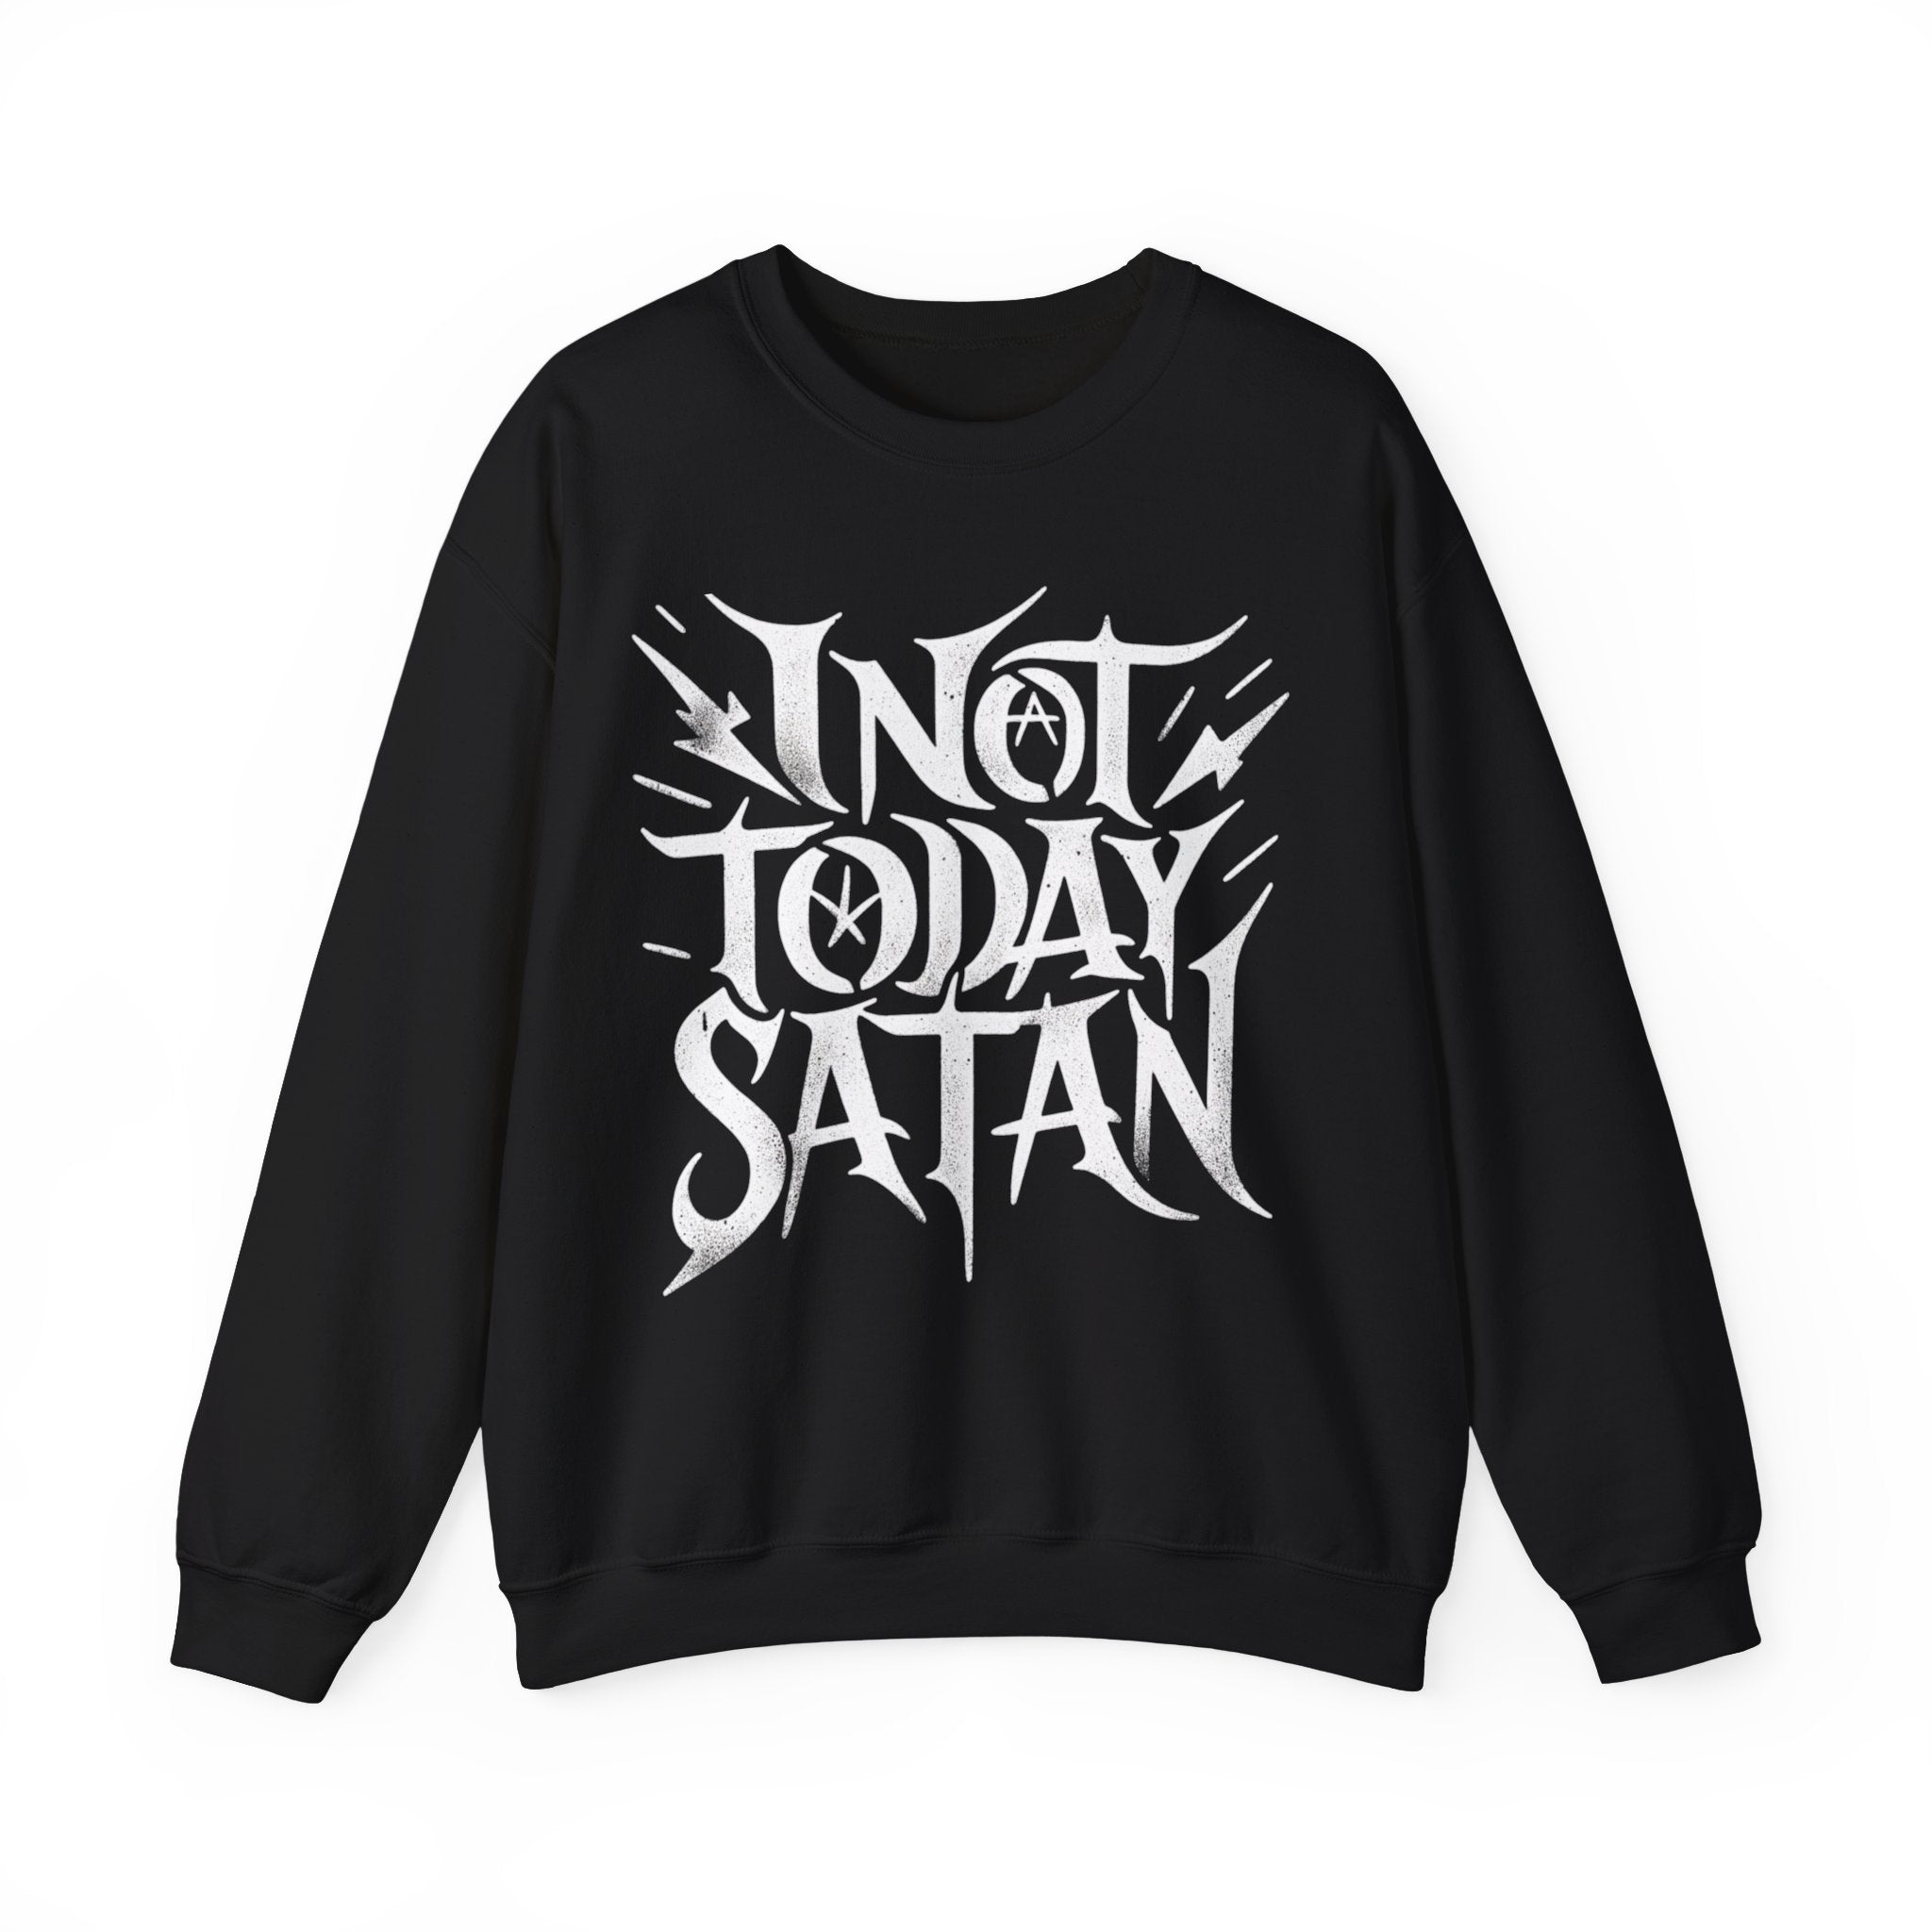 Stylish black Not Today Satan - Sweatshirt with white, stylized text reading "NOT TODAY SATAN" on the front. Perfect for the colder months, this cozy sweatshirt combines comfort and bold expression.